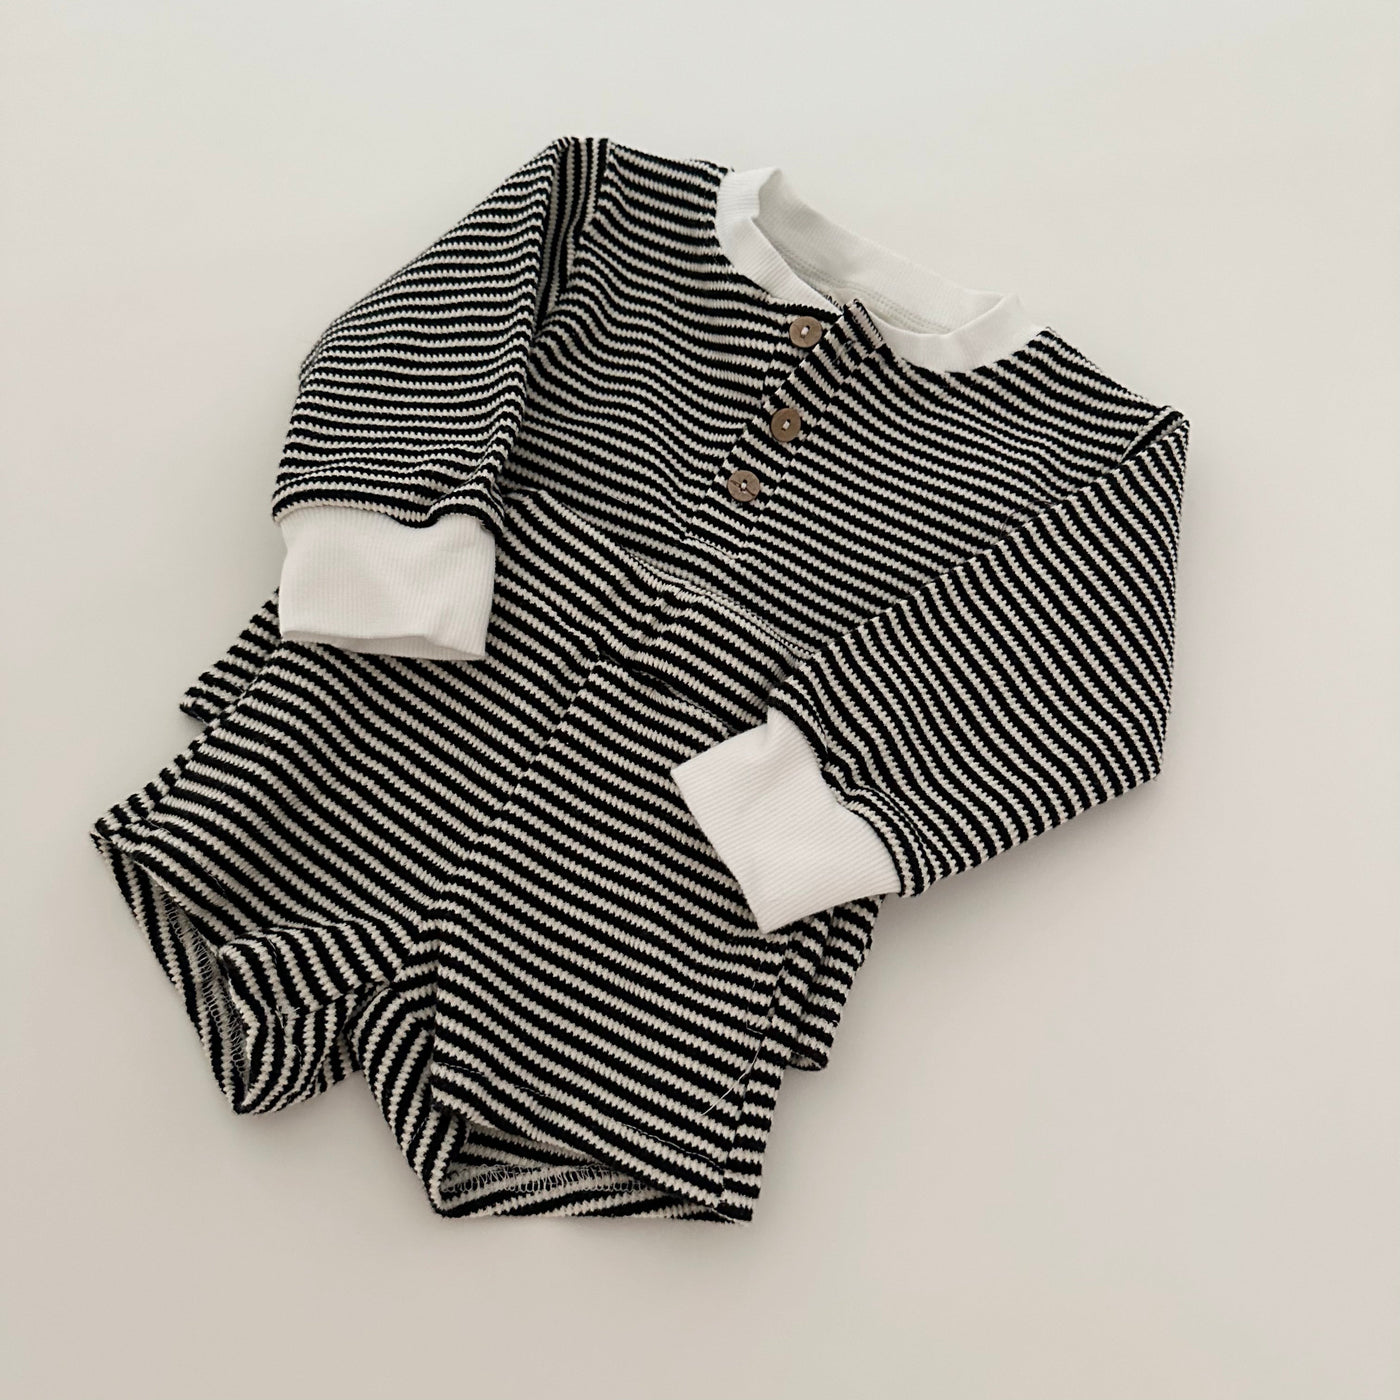 a striped outfit on a white surface